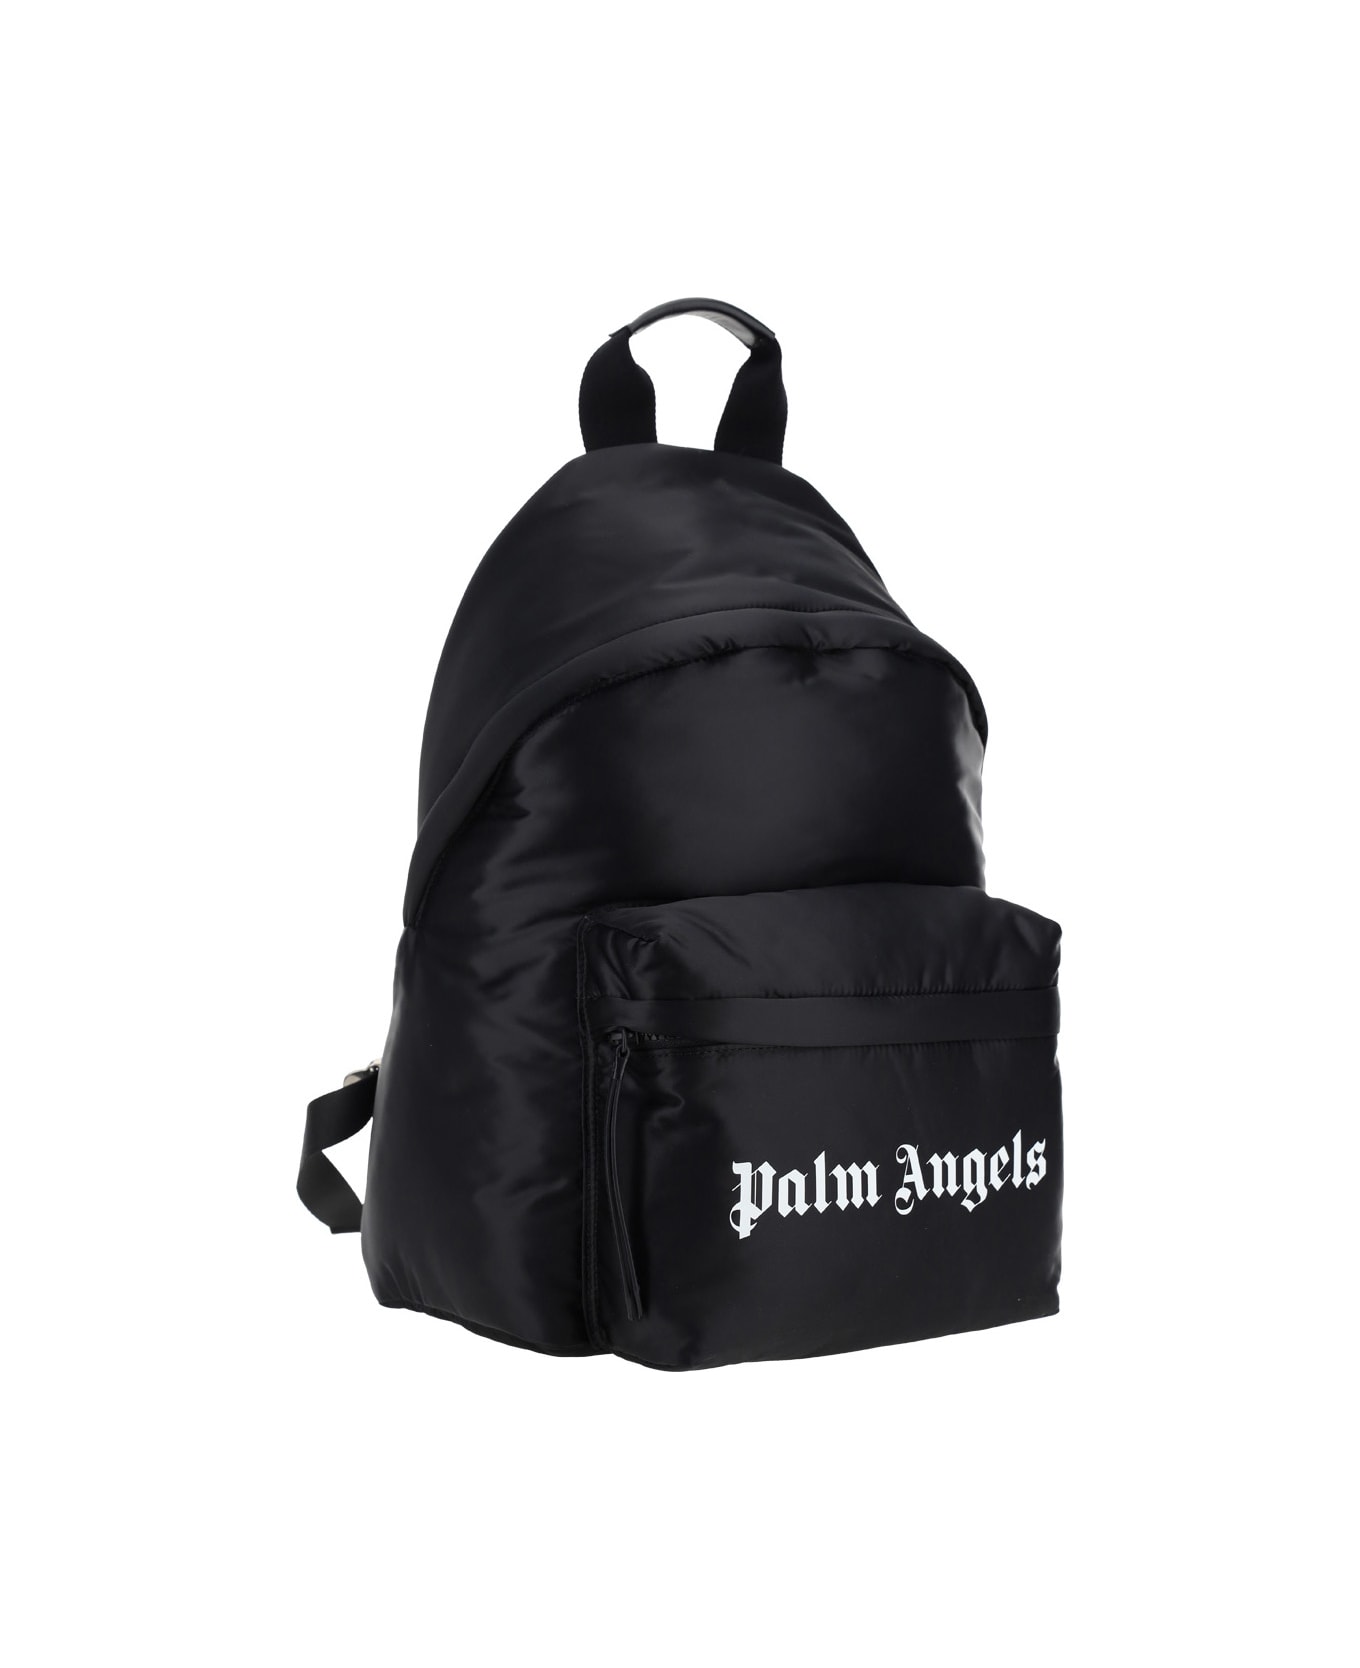 Palm Angels Backpack - Nero/bianco バックパック